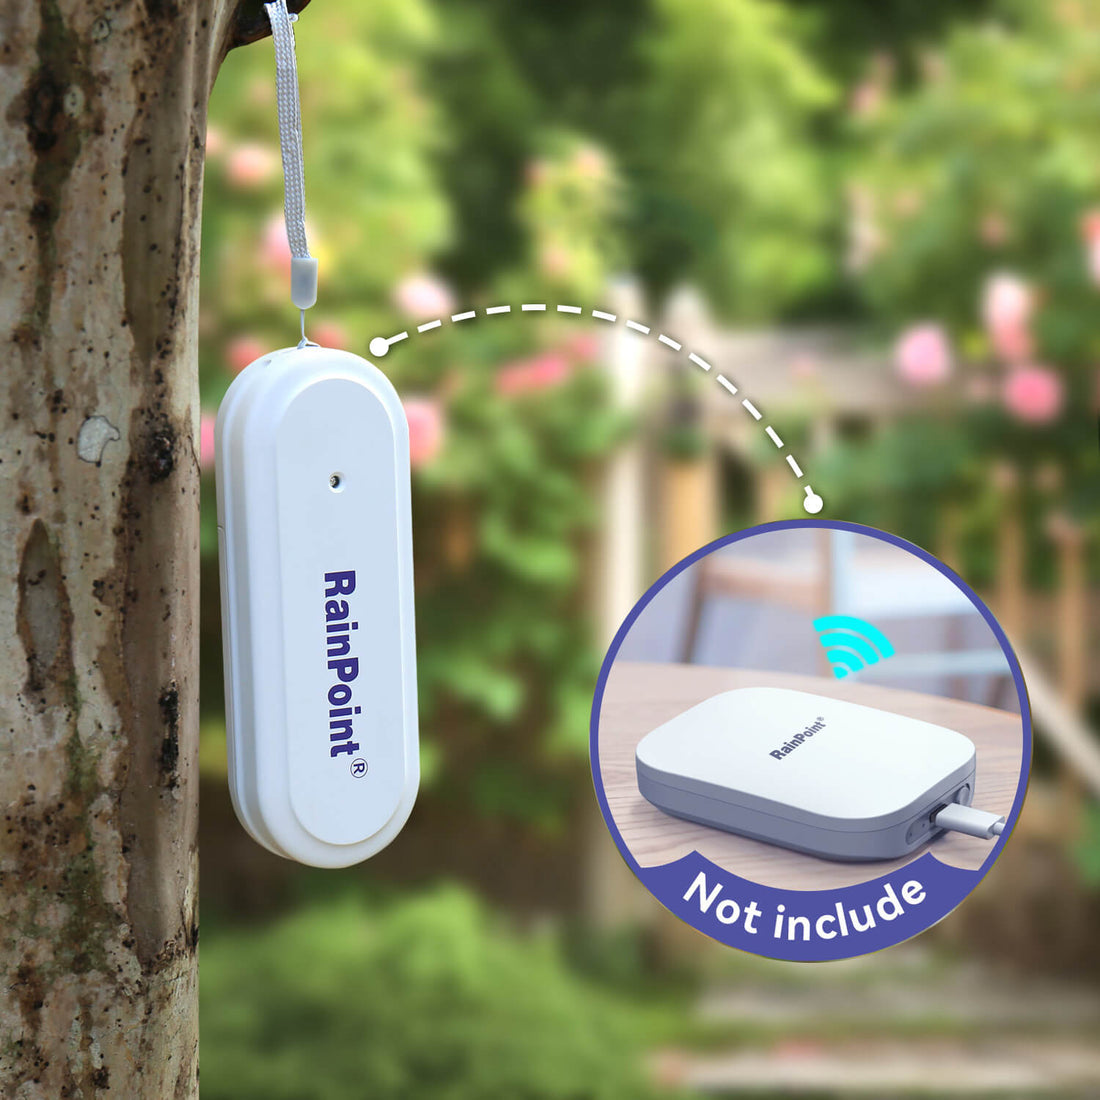 RainPoint Smart + Outdoor Air Humidity Sensor Model No: HCS014, Must be Used WiFi Hub, 2.4Ghz WiFi Only